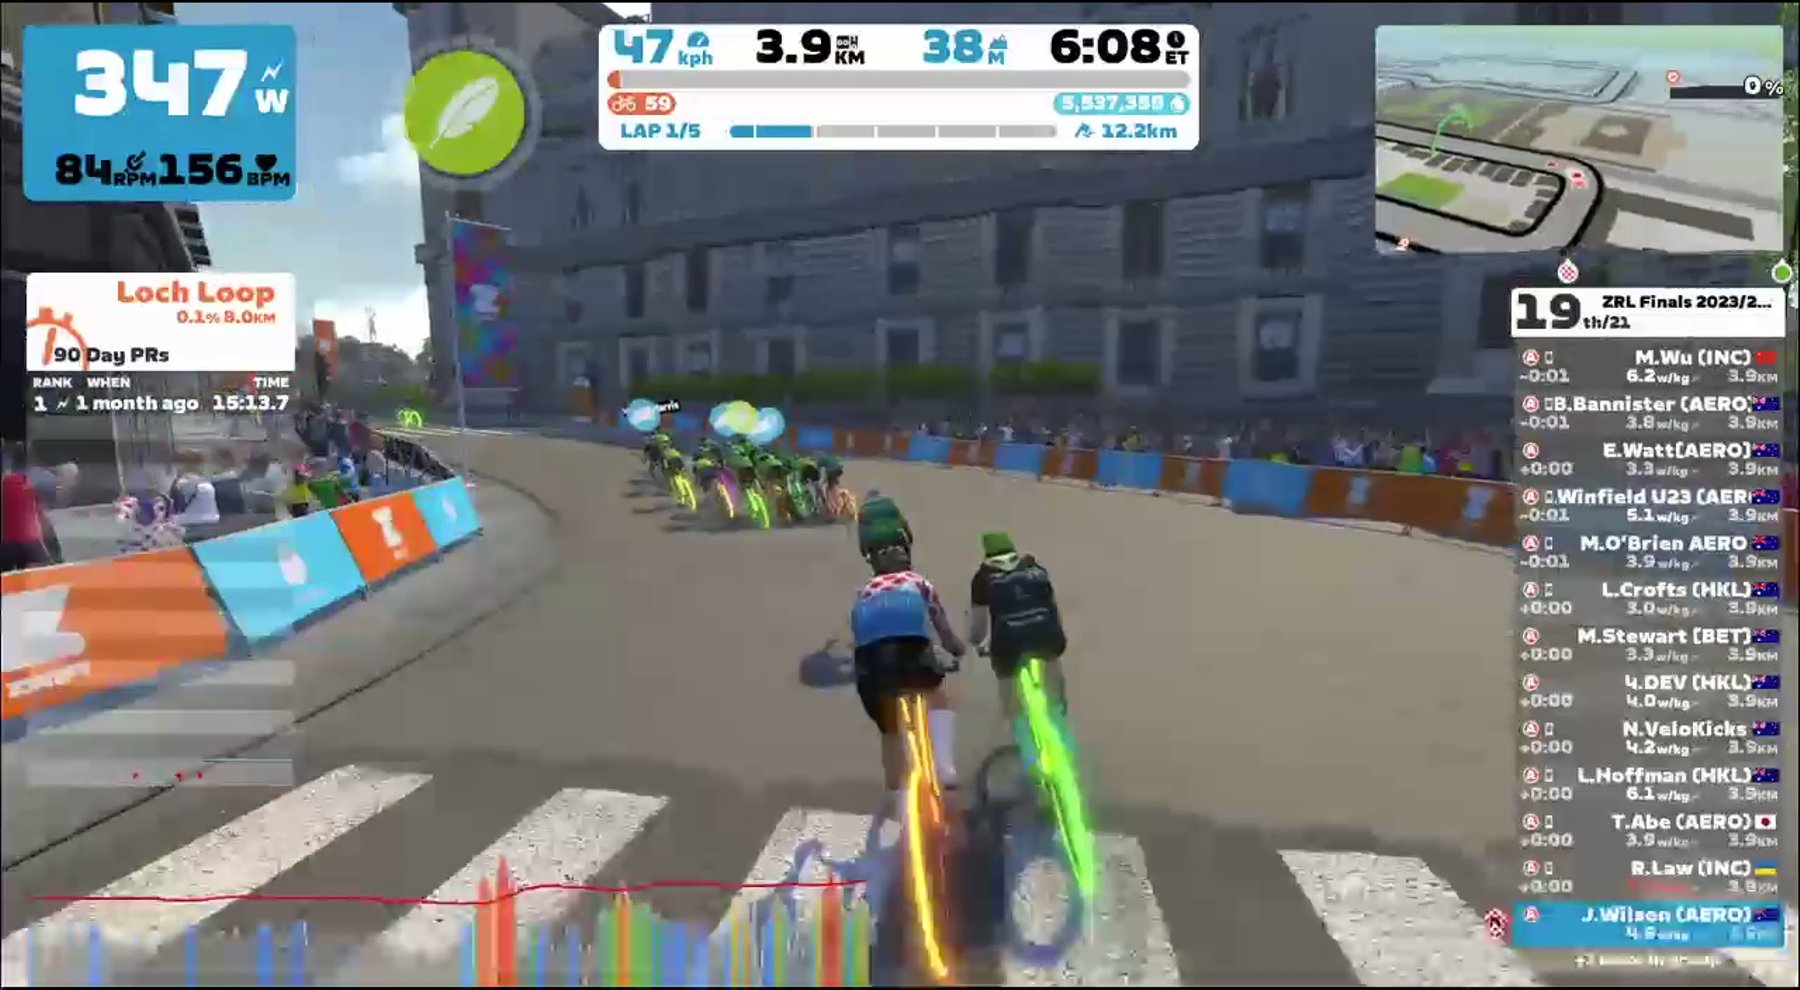 Zwift - Race: ZRL Finals 2023/24 - Open OCEANIA Division 1 - Cup Final (Part2) (A) on Glasgow Reverse in Scotland